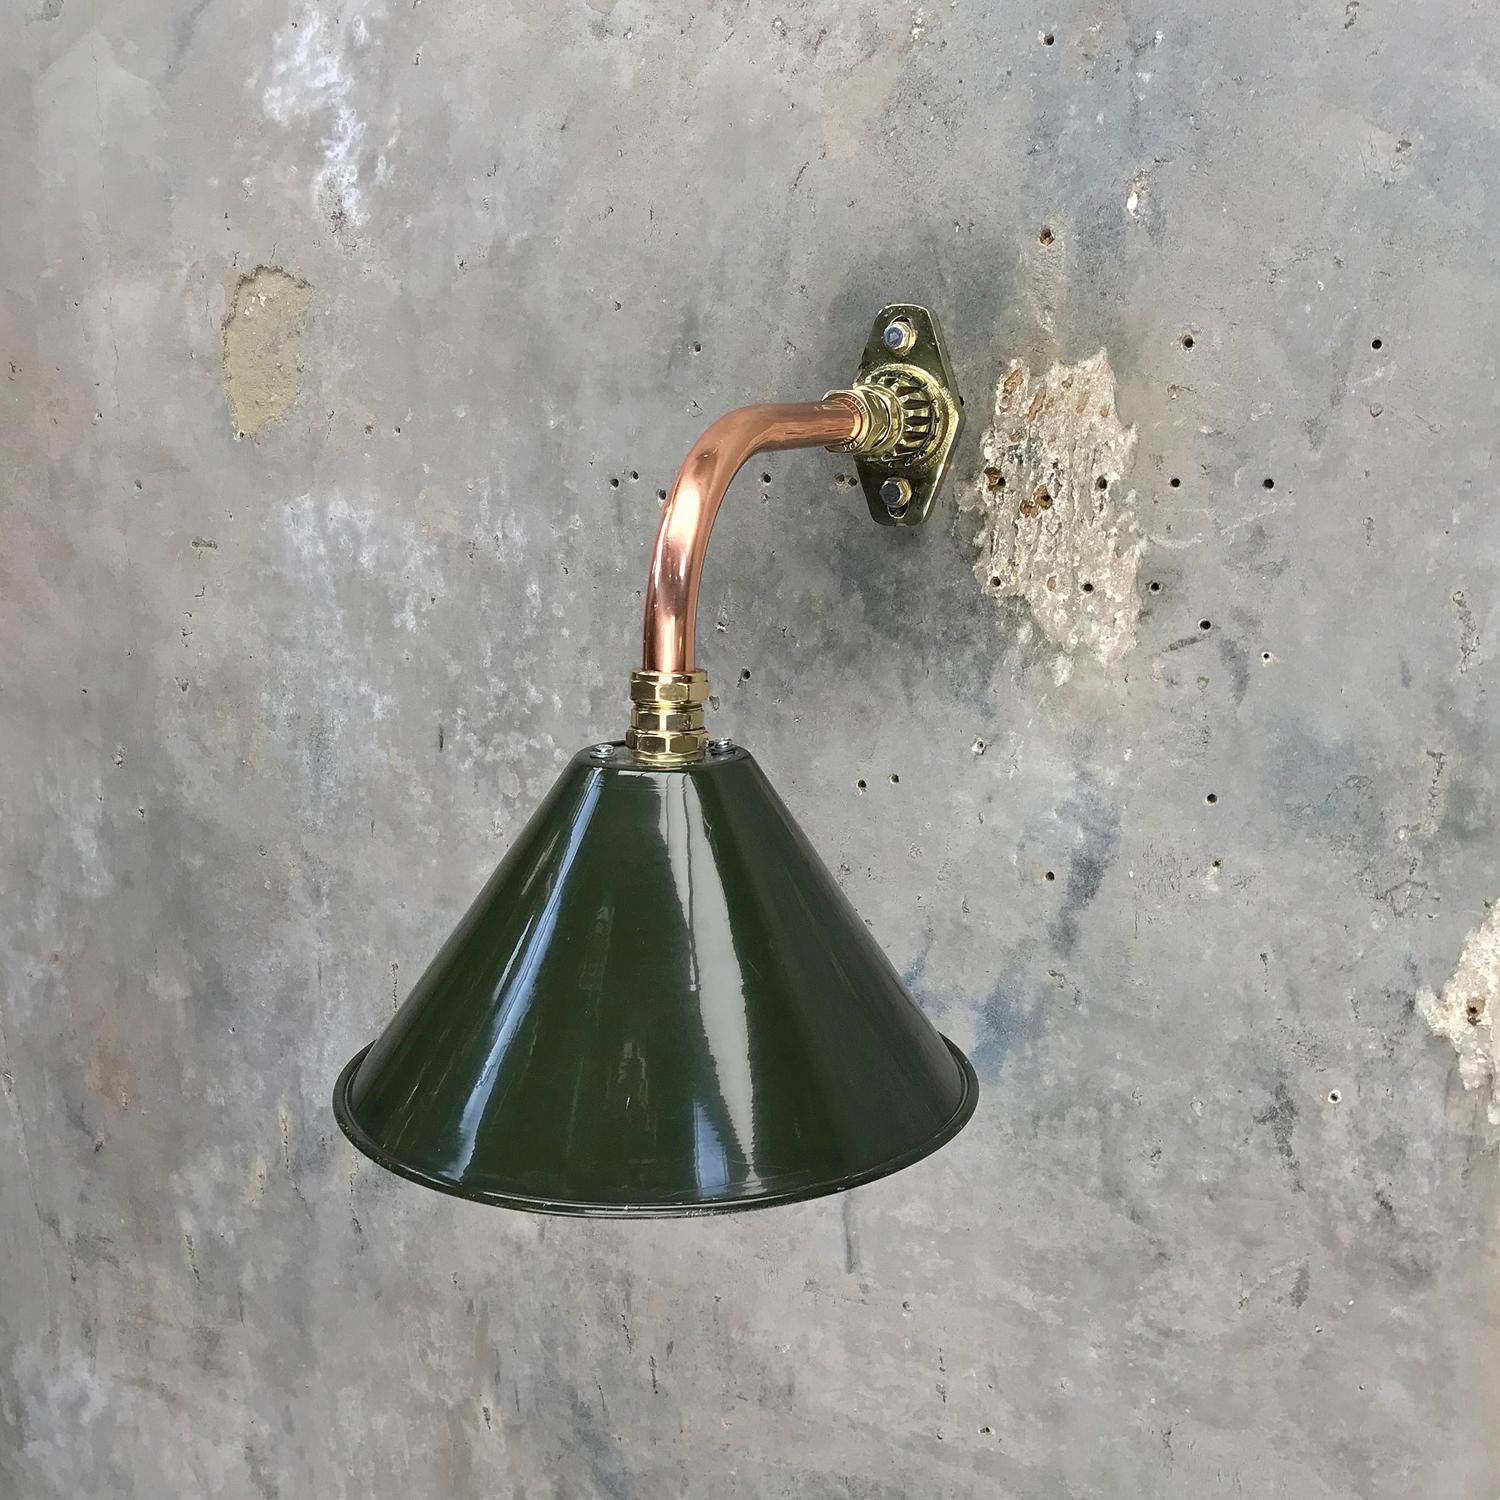 1980s Ex British Army Light Shade / Copper and Brass Cantilever, Original Green For Sale 1